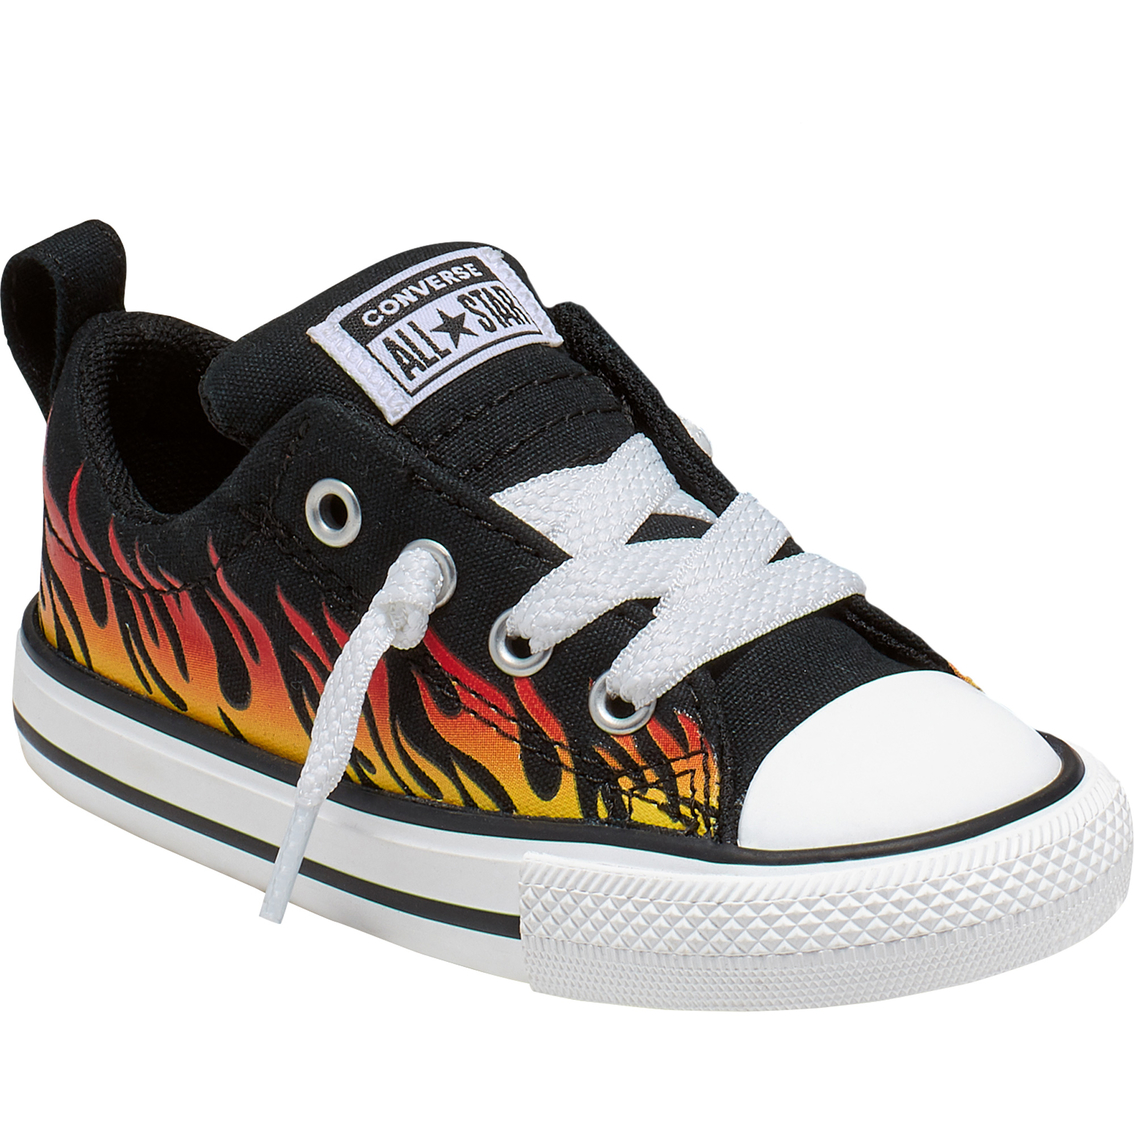 converse all star kids shoes